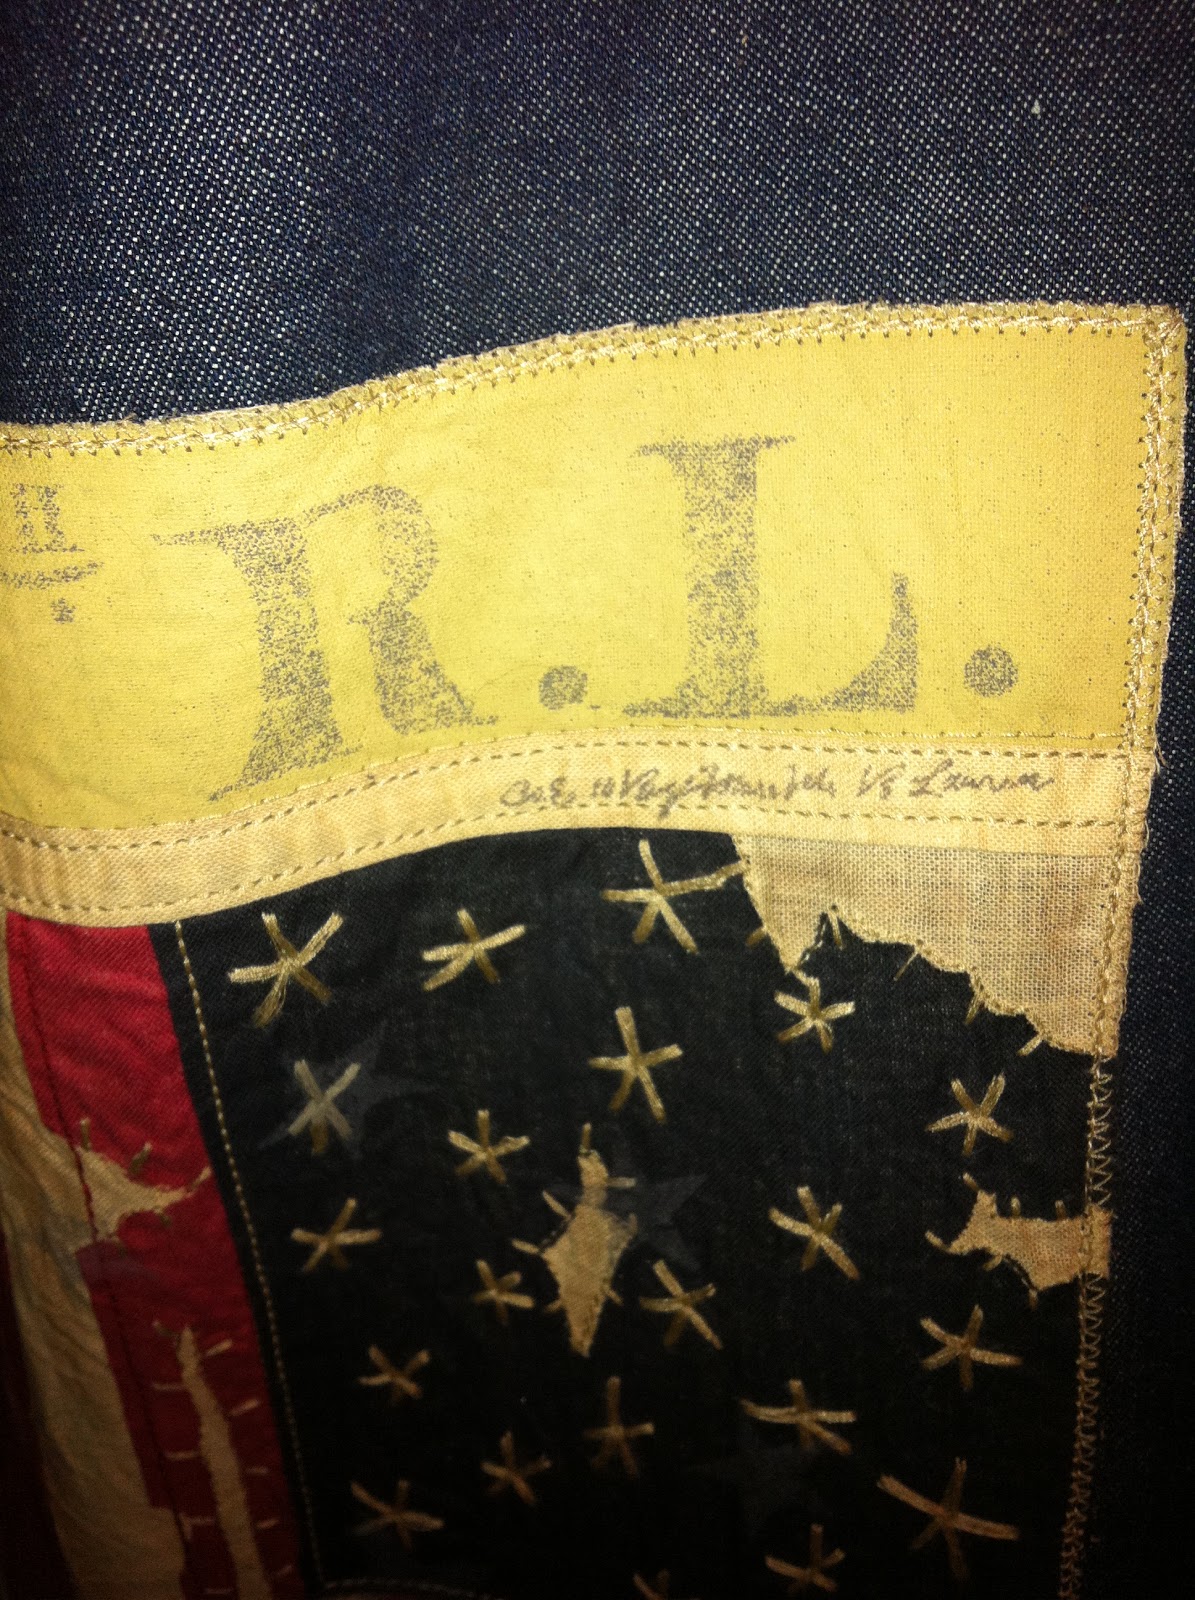 DIARY OF A CLOTHESHORSE: POLO JEANS CO/RALPH LAUREN DENIM TOTE GIVEAWAY!!